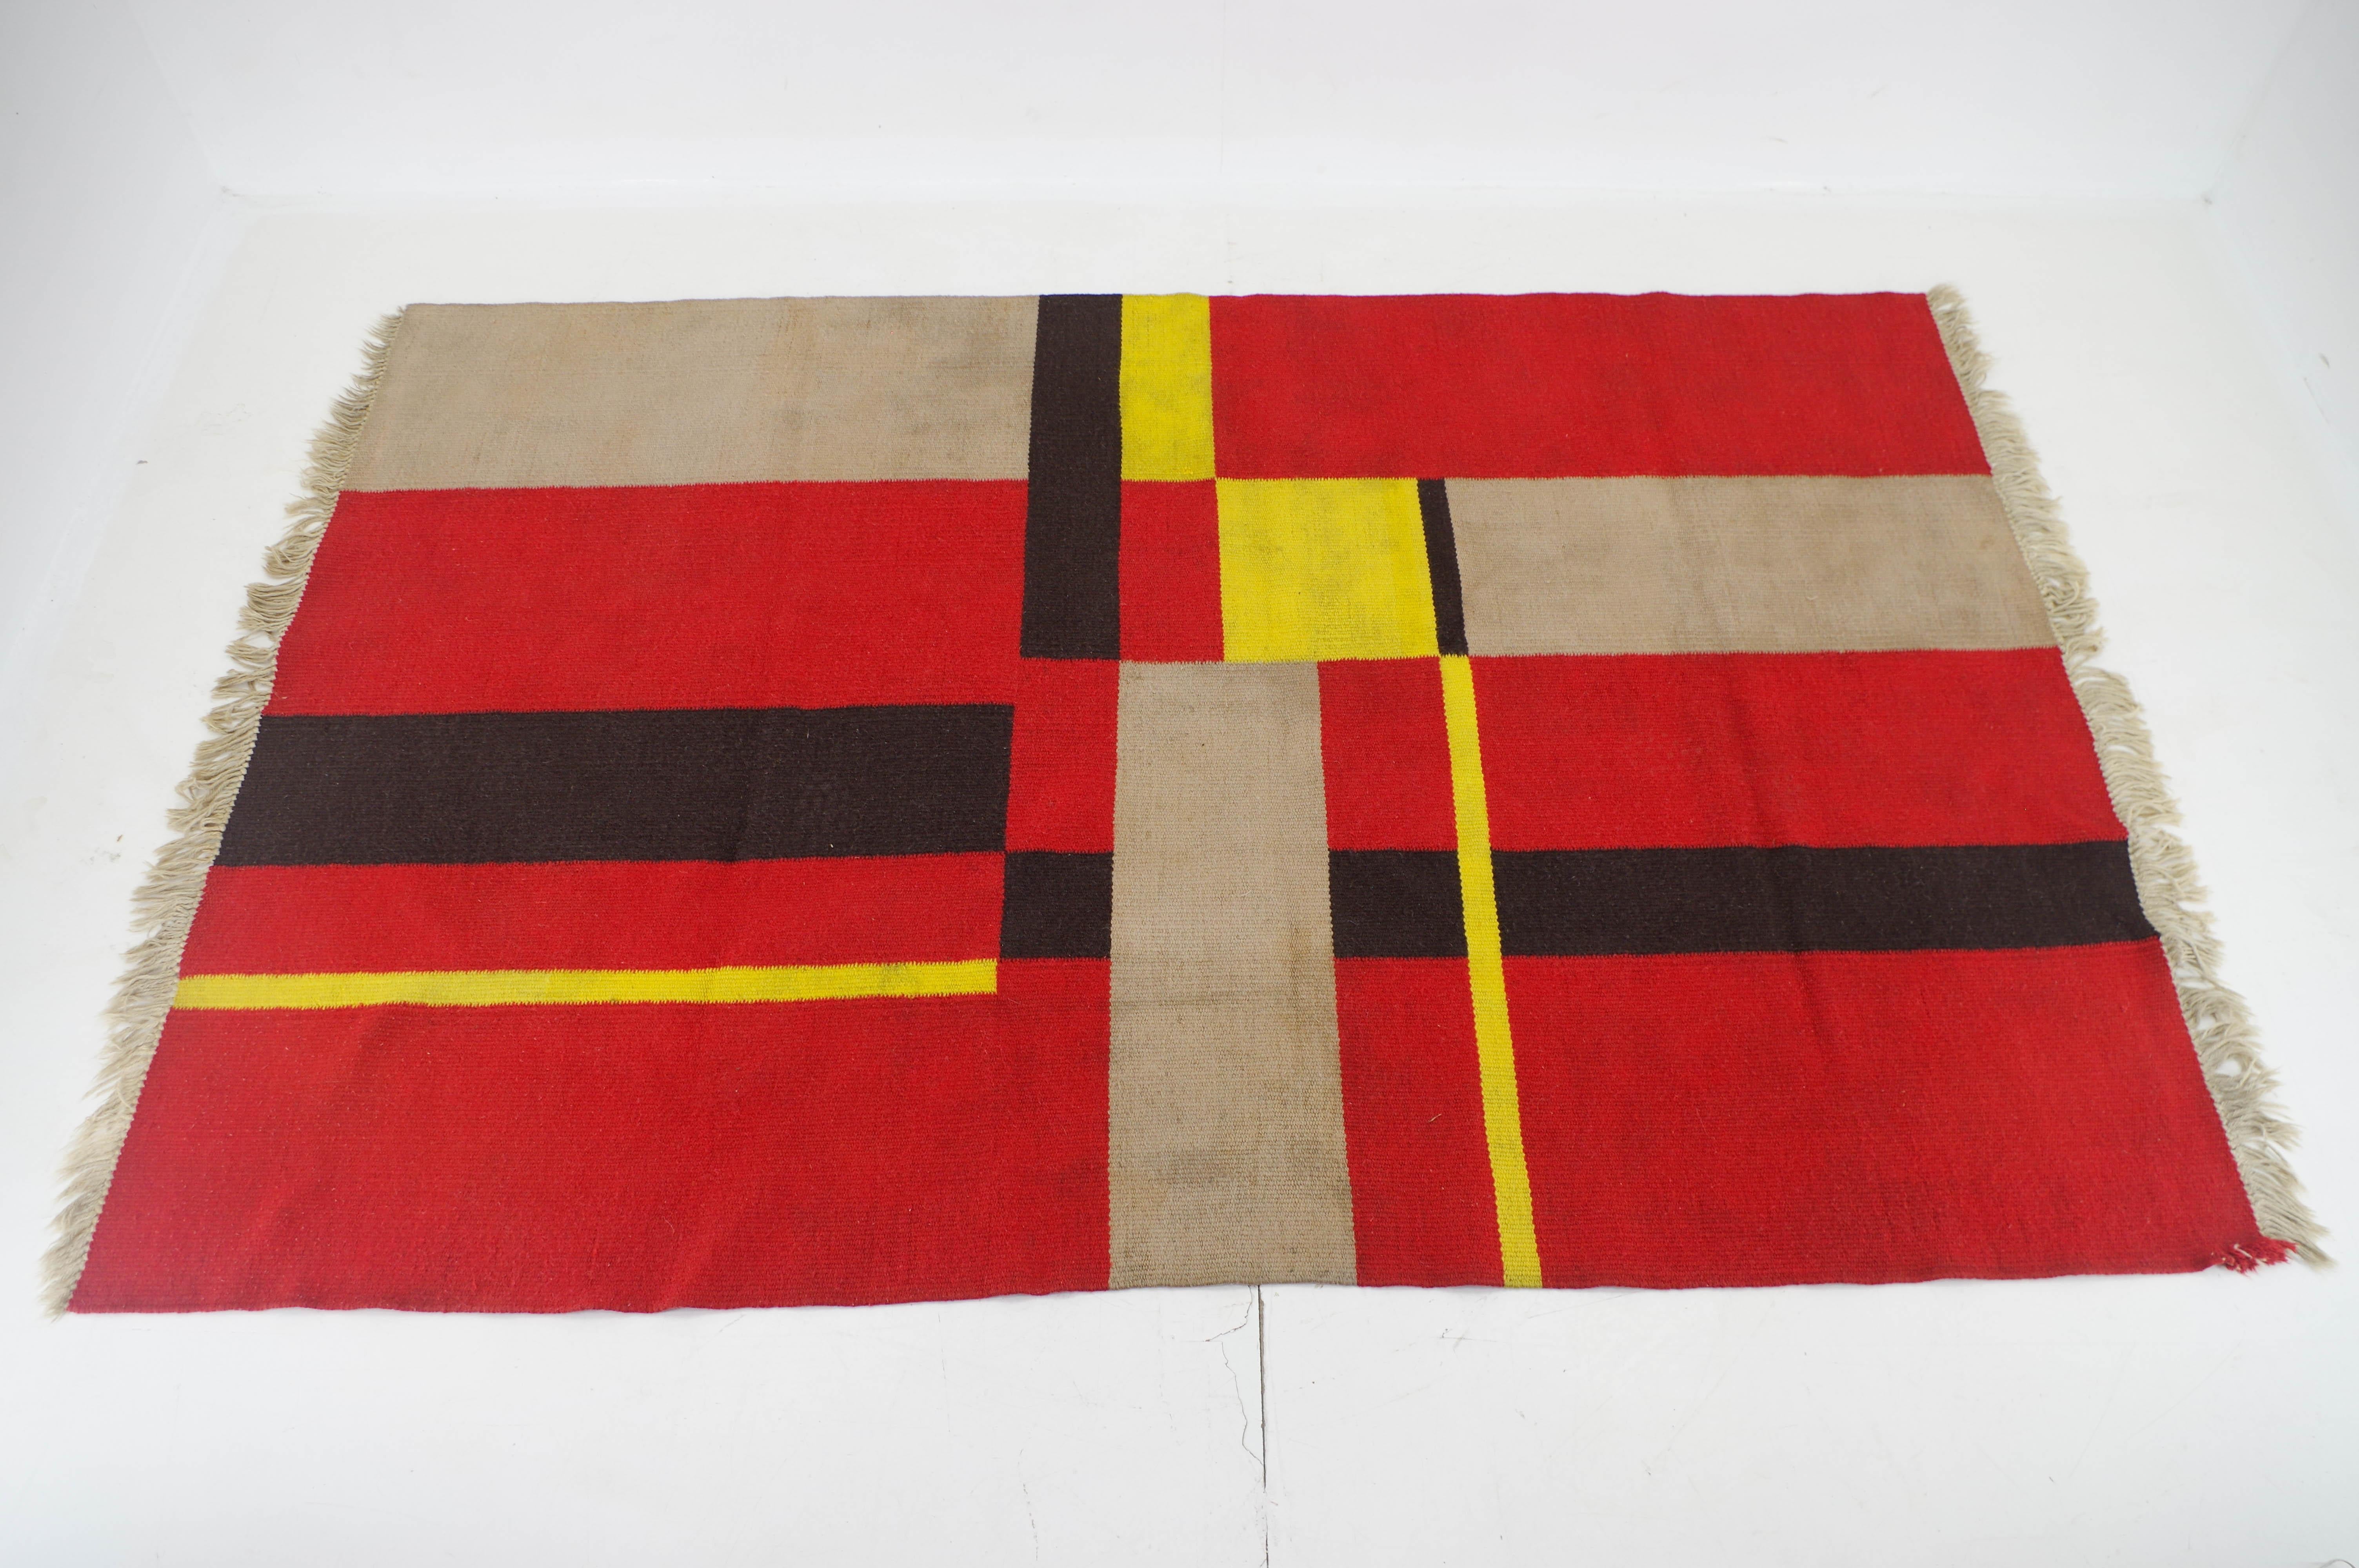 Large Bauhaus carpet with geometric pattern.
Double side.
Made in Czechoslovakia in 1940s.
Sun fading on one side.
Some traces of liquid.